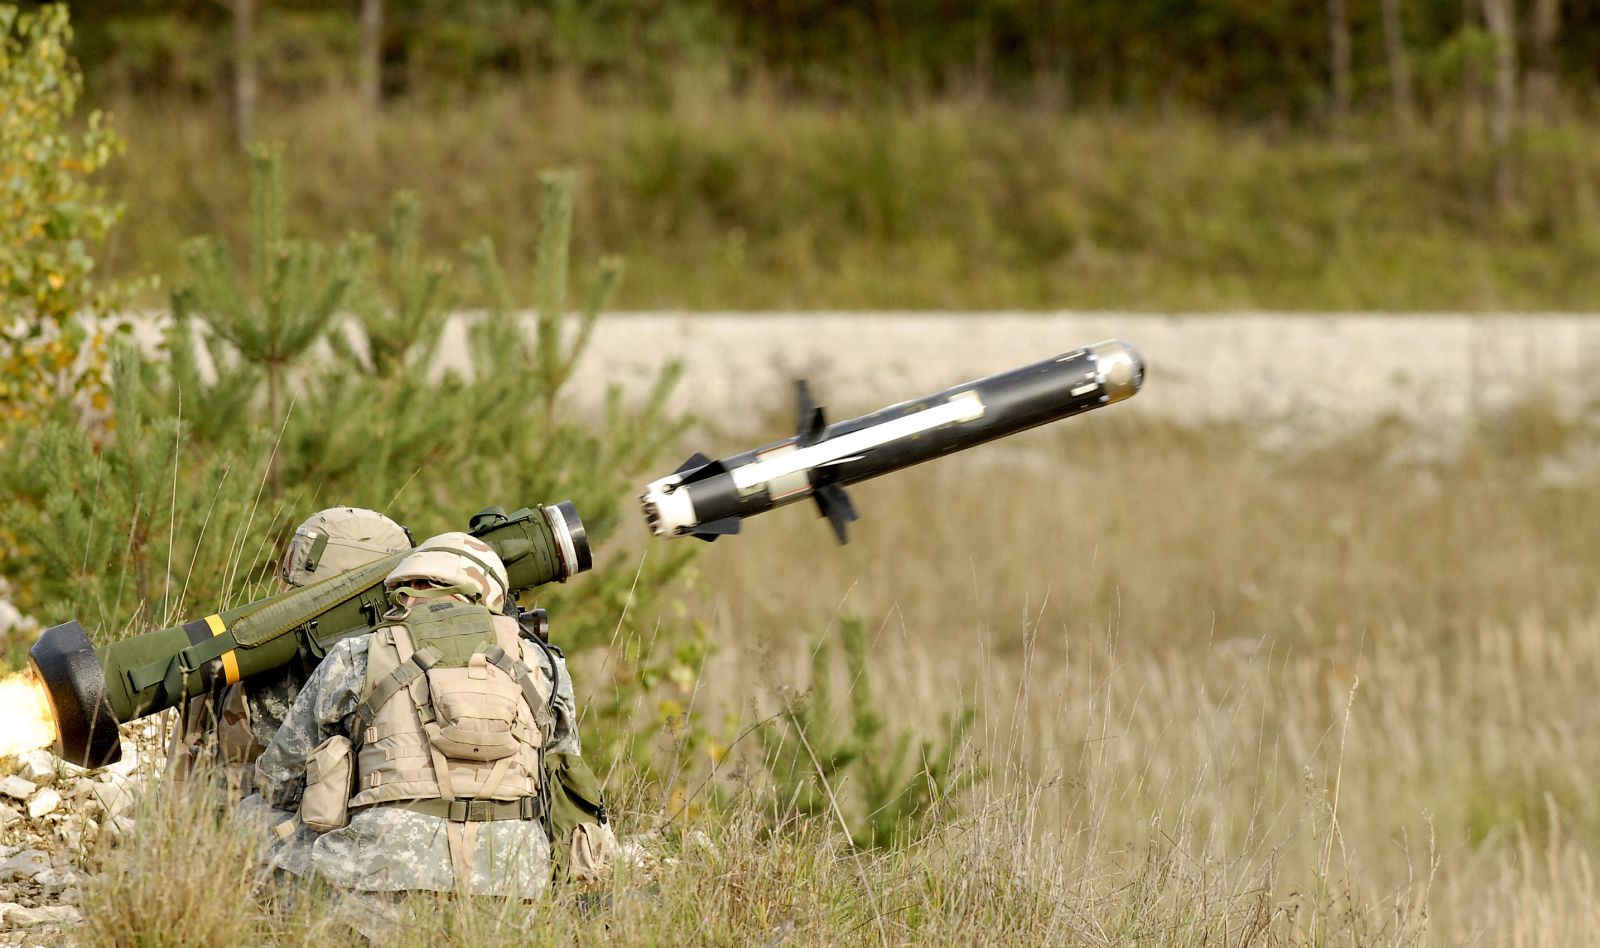 U.S. Army Soldiers from the 173rd Airborne Brigade Combat Team fire an FGM-148 Javelin anti-tank guided missile during training in Grafenwoehr, Germany, Oct. 24, 2006, in preparation for deployment. Soldiers with the 173rd are training together for the f irst time since their unit transformation into a brigade combat team. (U.S. Army photo by Gary L. Kieffer) (Released)